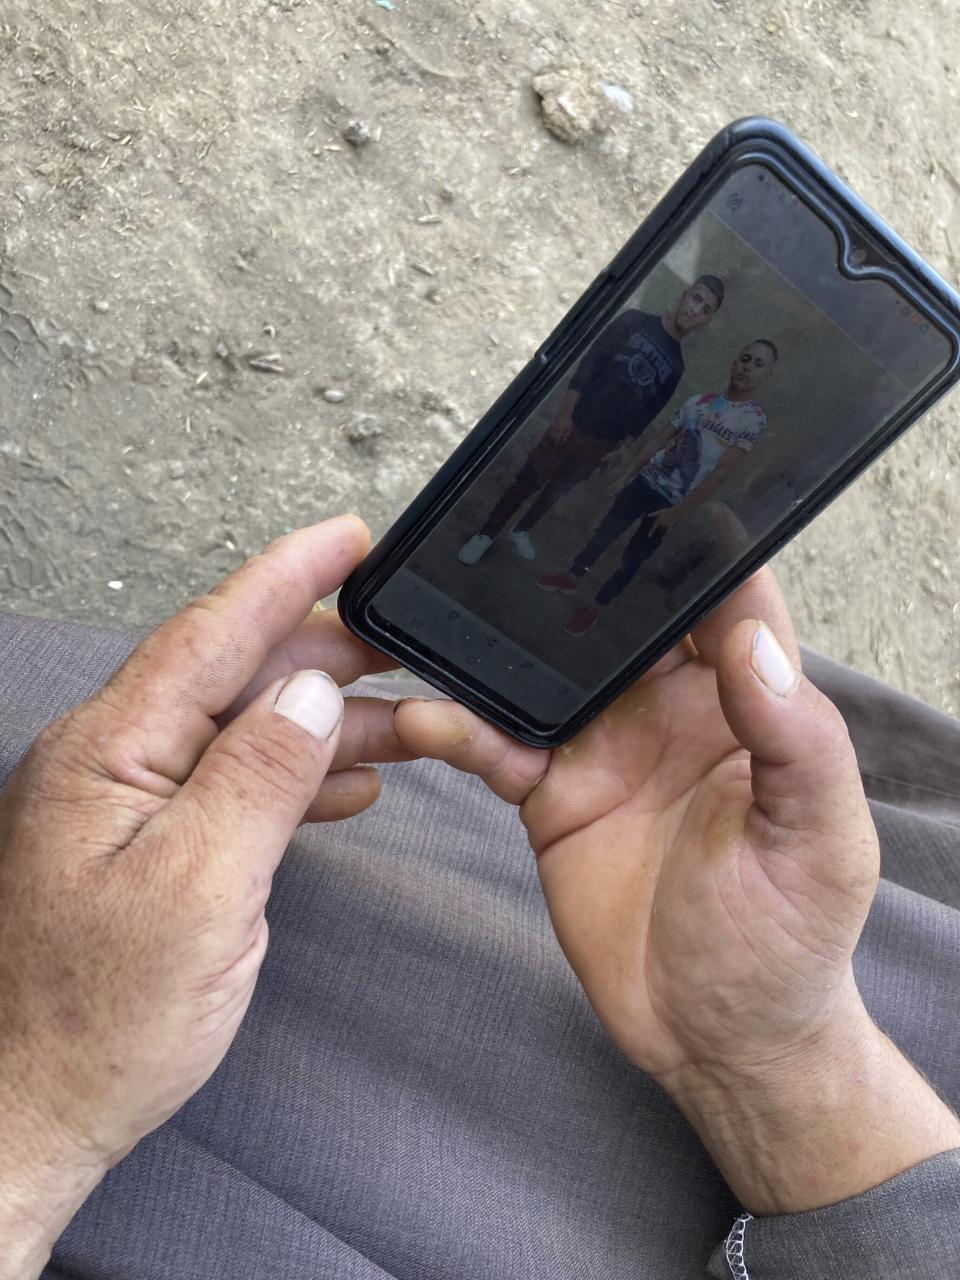 Ashraf Sadawy Abdel-Fattah holds his phone and looks at a picture of two of his sons who died in flooding in the Libyan city of Derna, Mohamed Ashraf 23, his second-oldest, and Abdel-Rahman, 19, as he sits outside his home in the farming village of Nazlet el-Sharif, Egypt, Thursday Sept. 14, 2023. The village is mourning the deaths of dozens of its men in the floodwaters that tore through a city in neighboring Libya. At least 74 bodies were brought back earlier this week for burial. (AP Photo/Samy Magdy)